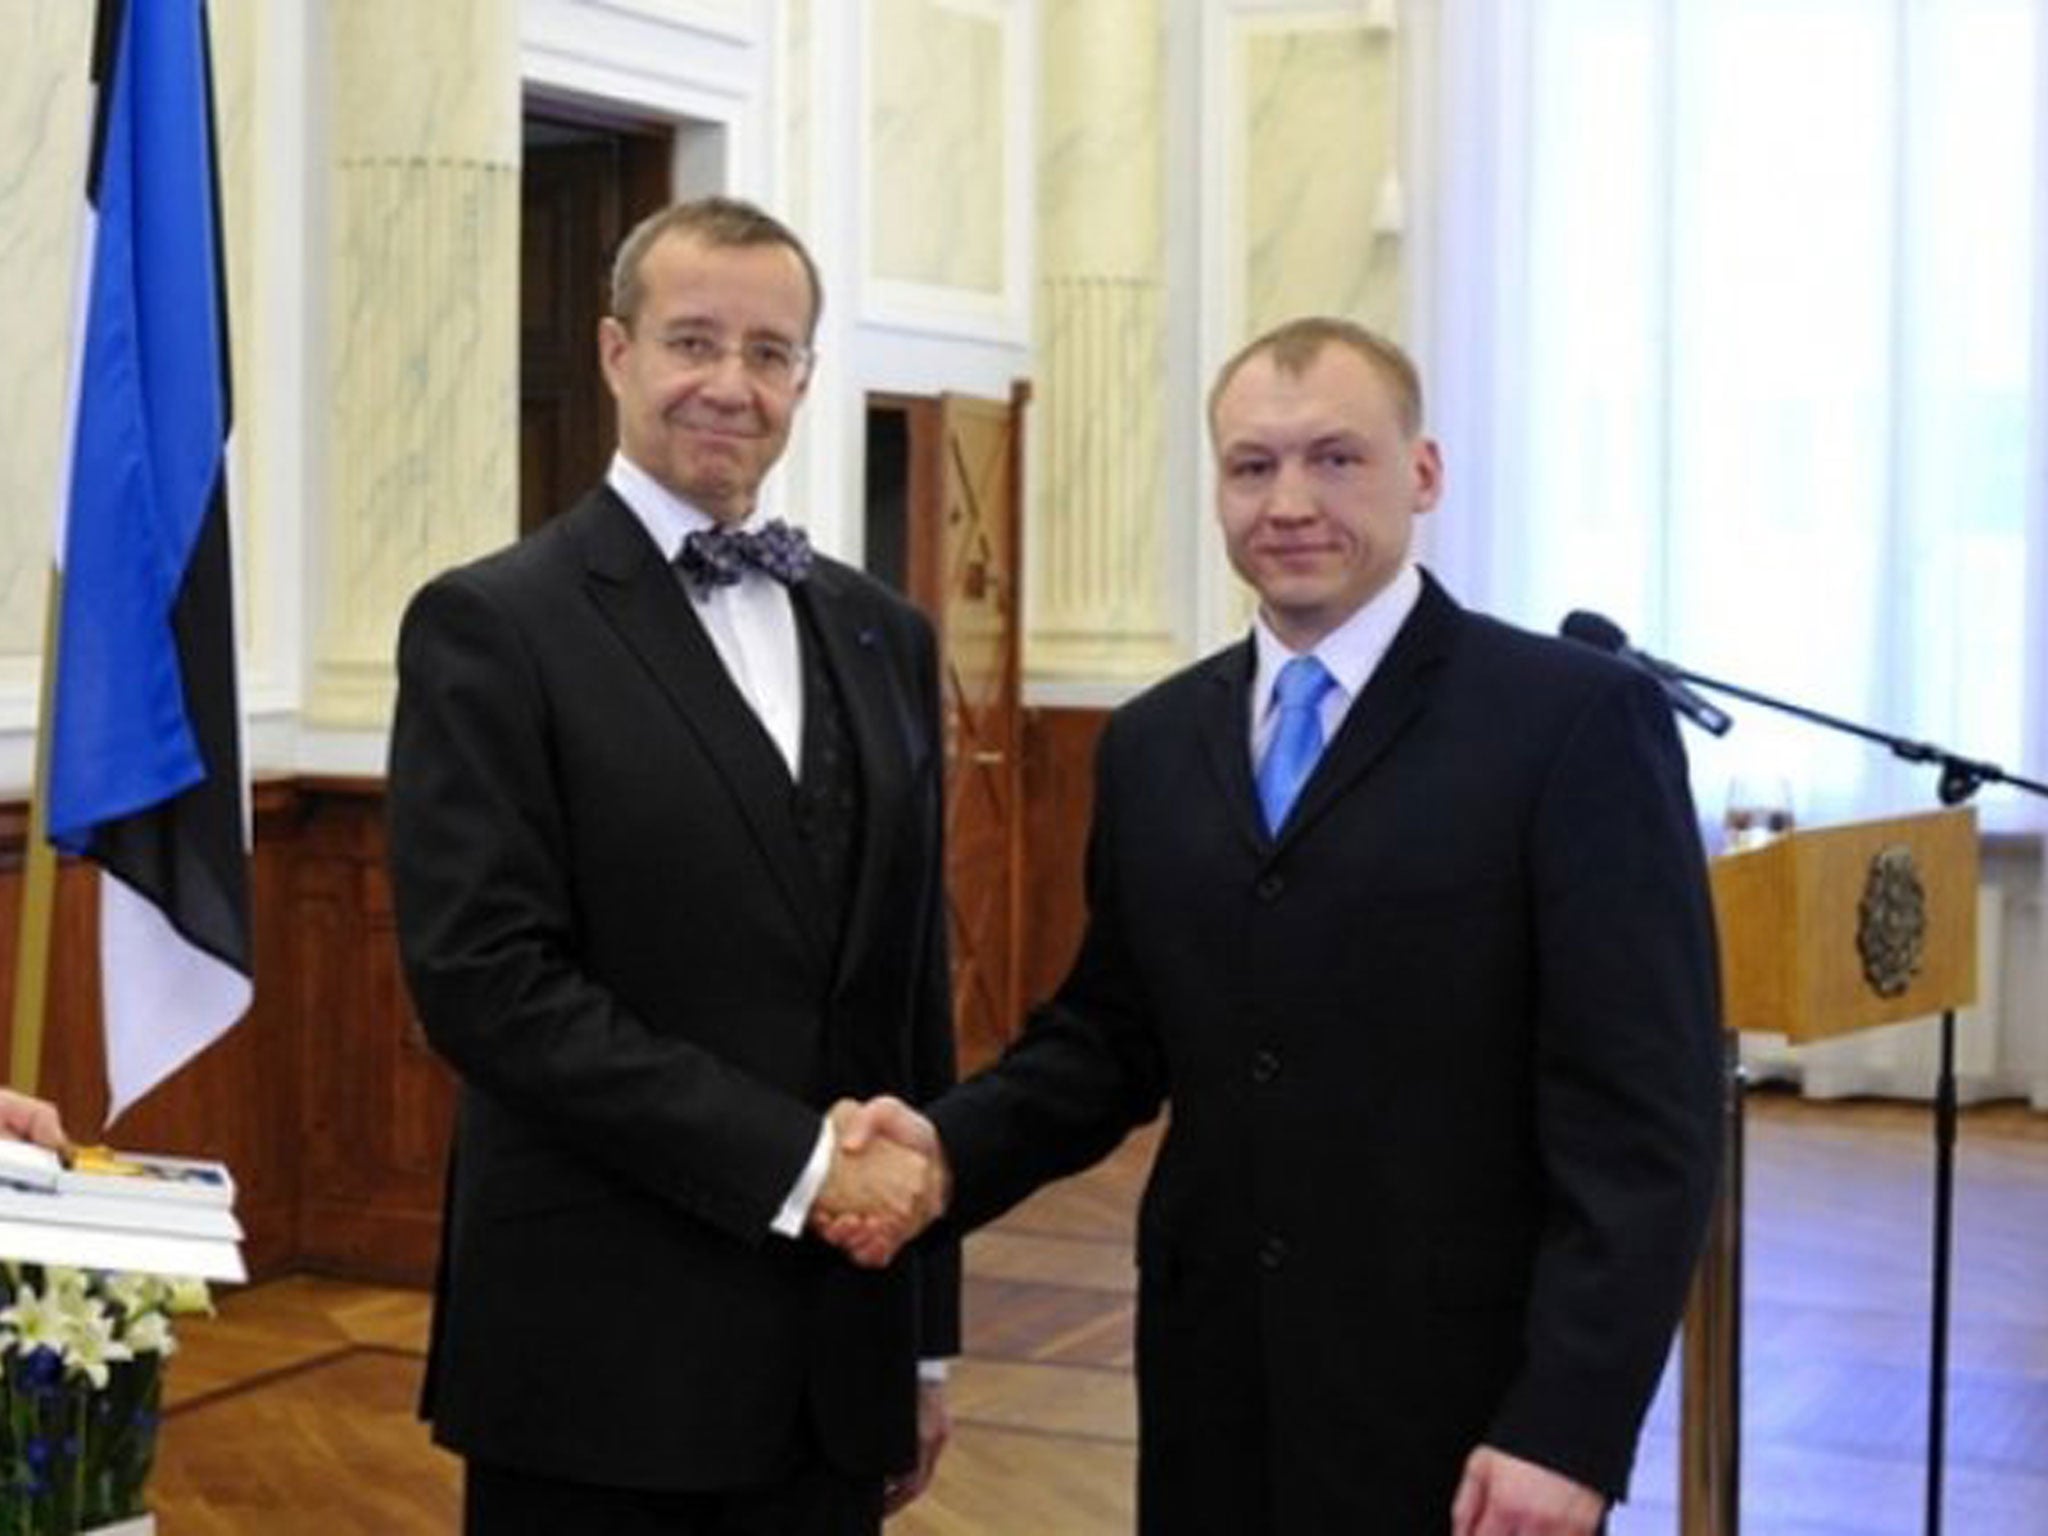 Eston Kohver, right, was decorated by the President in 2010